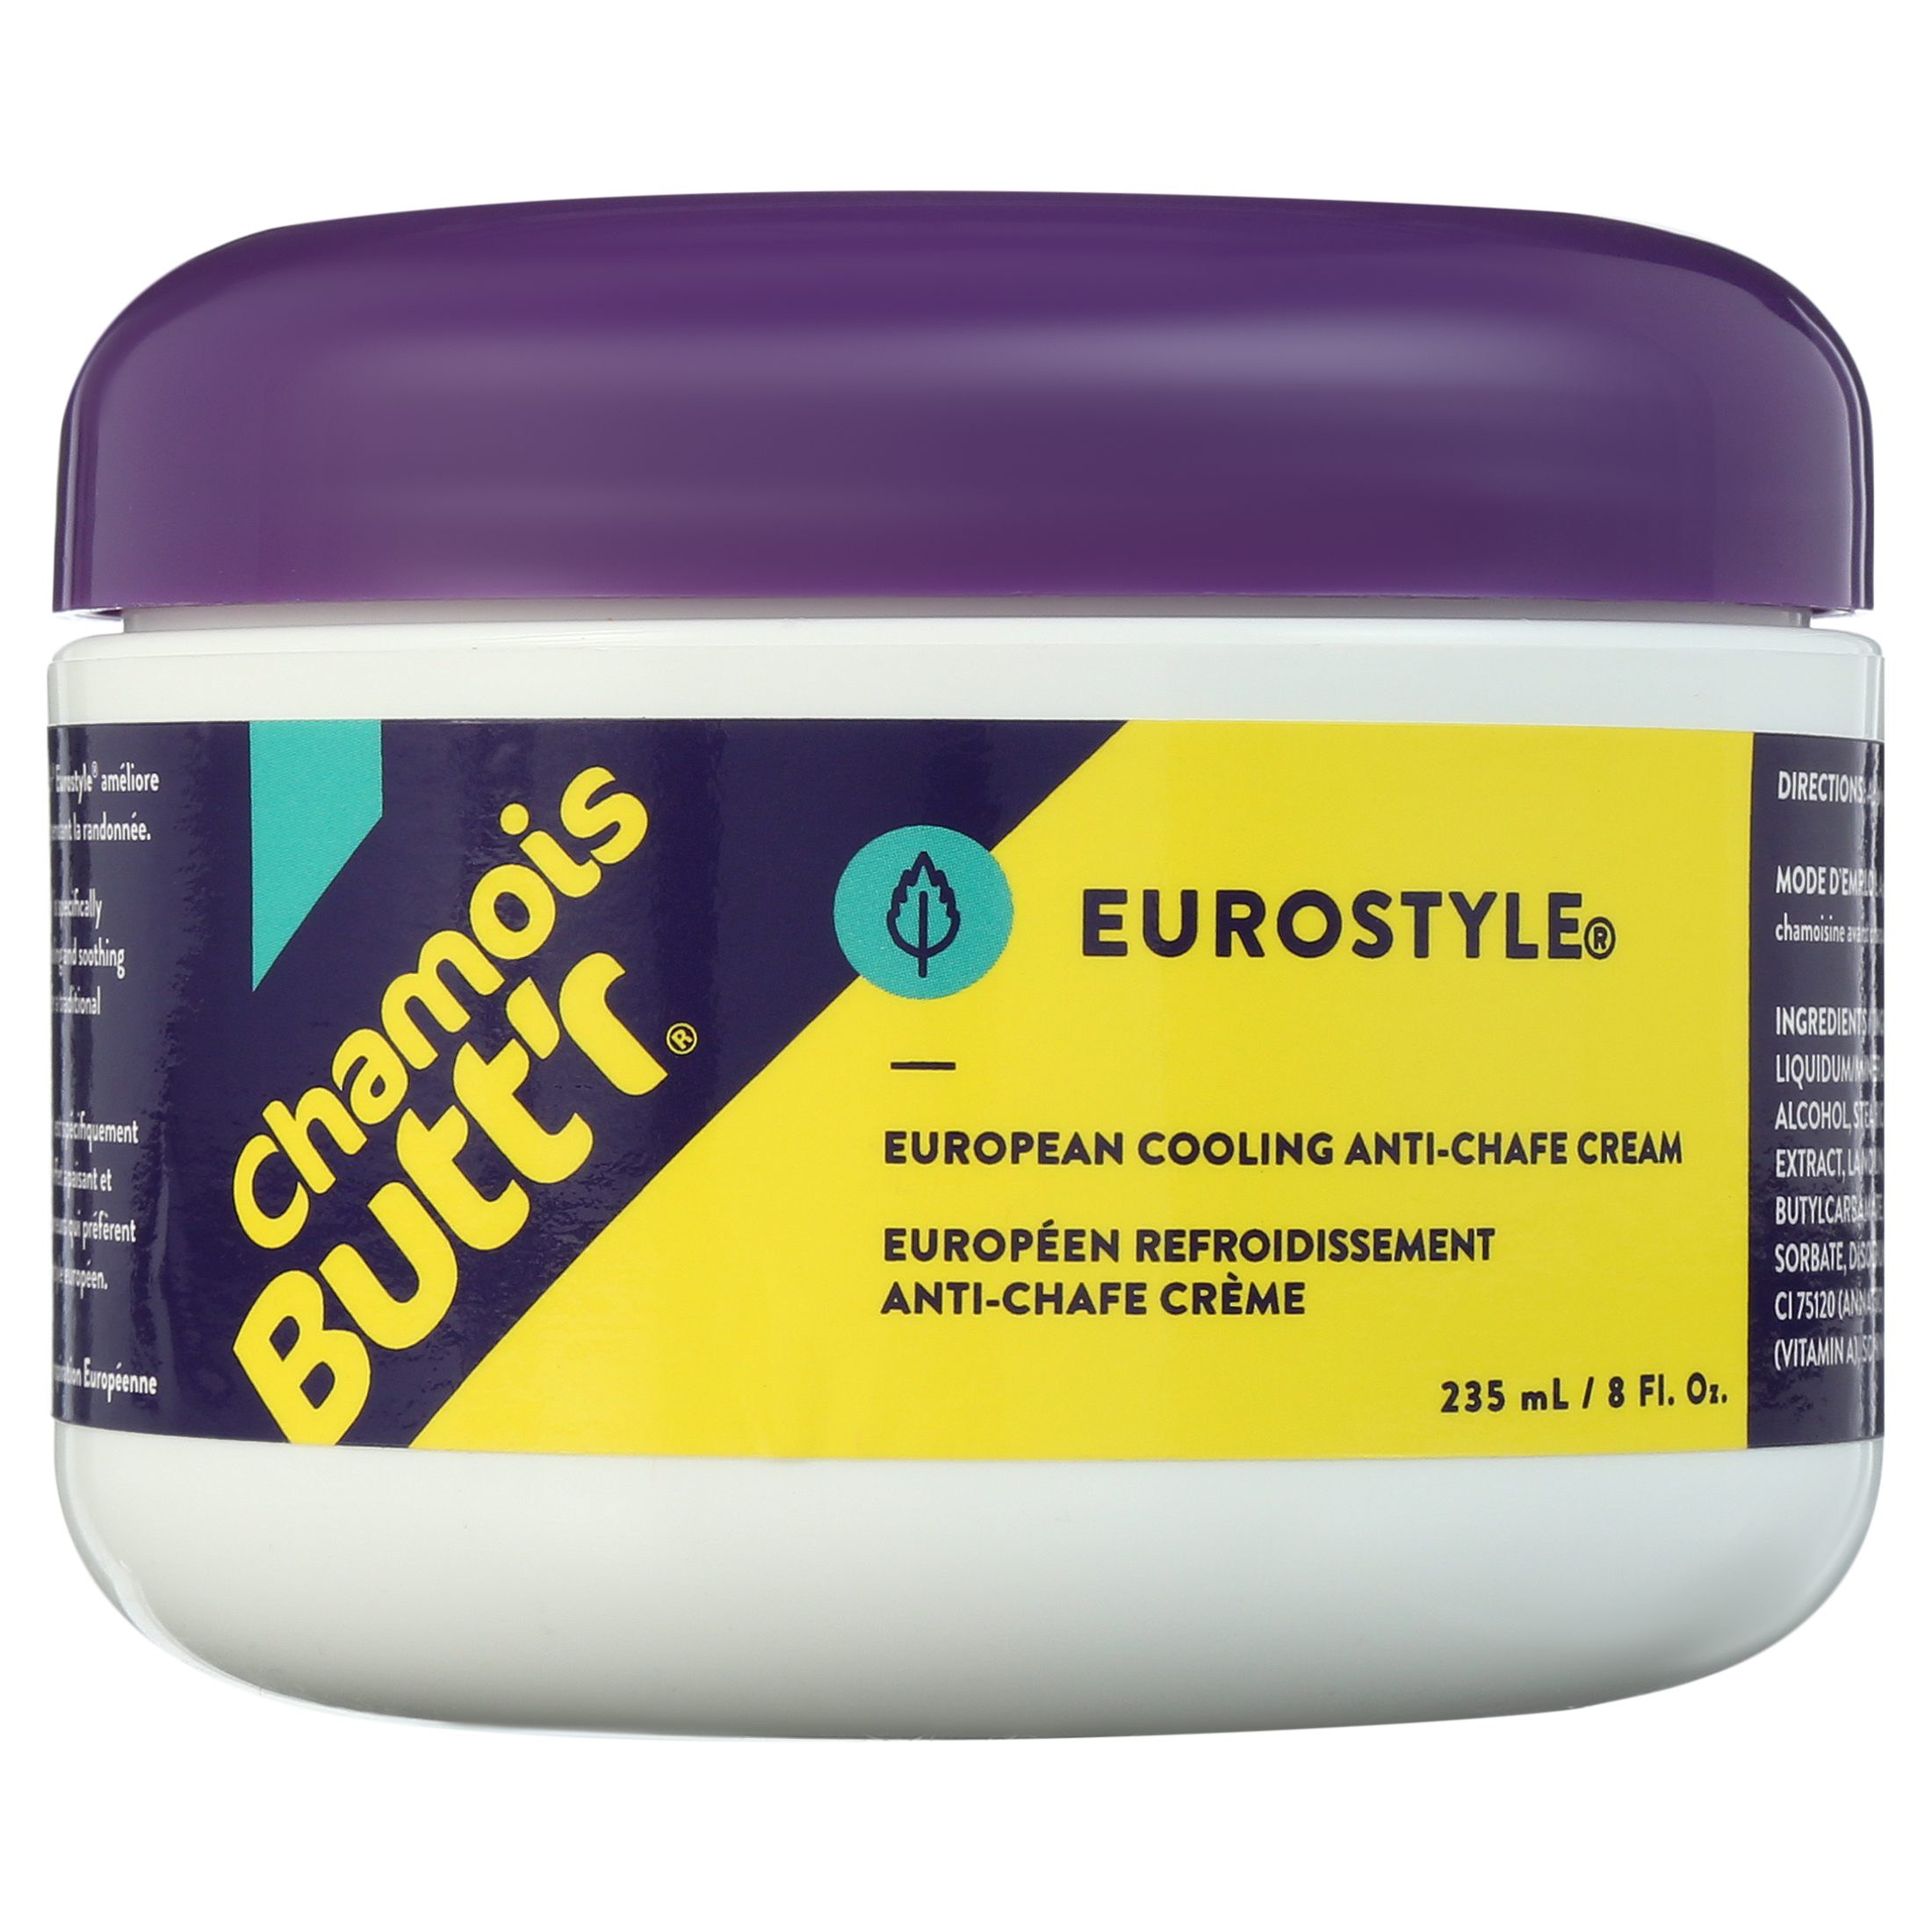 Chamois Buttr Eurostyle Anti Chafe Cream Non-Greasy Lubricant 8 Ounce Jar - image 5 of 7